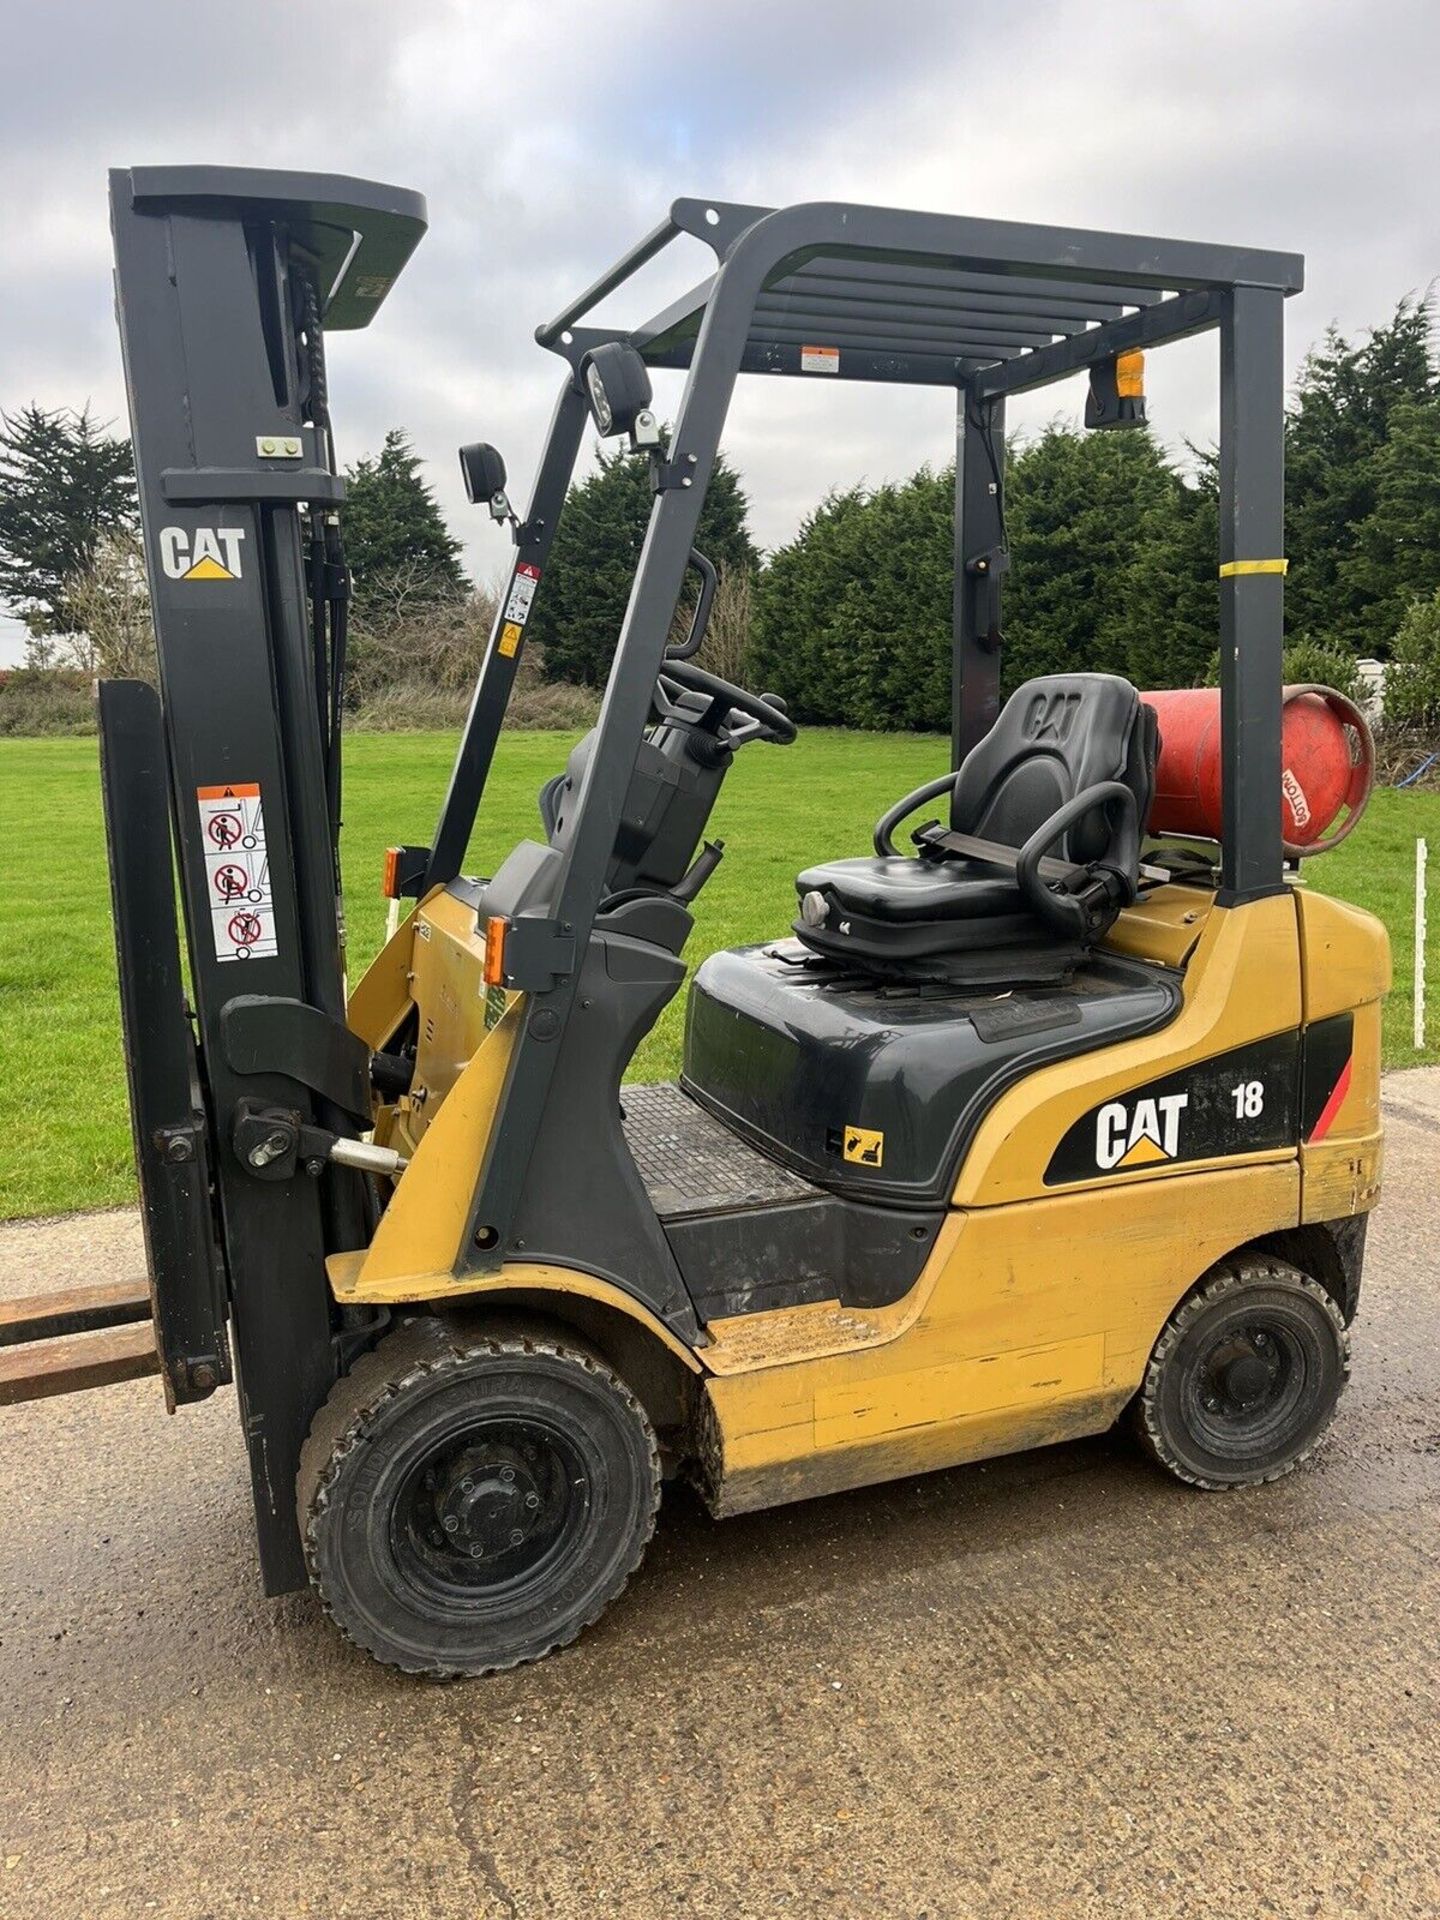 2018 CATERPILLAR 1.8 Tonne Gas Forklift Truck (Container) Triple Mast - Image 2 of 4